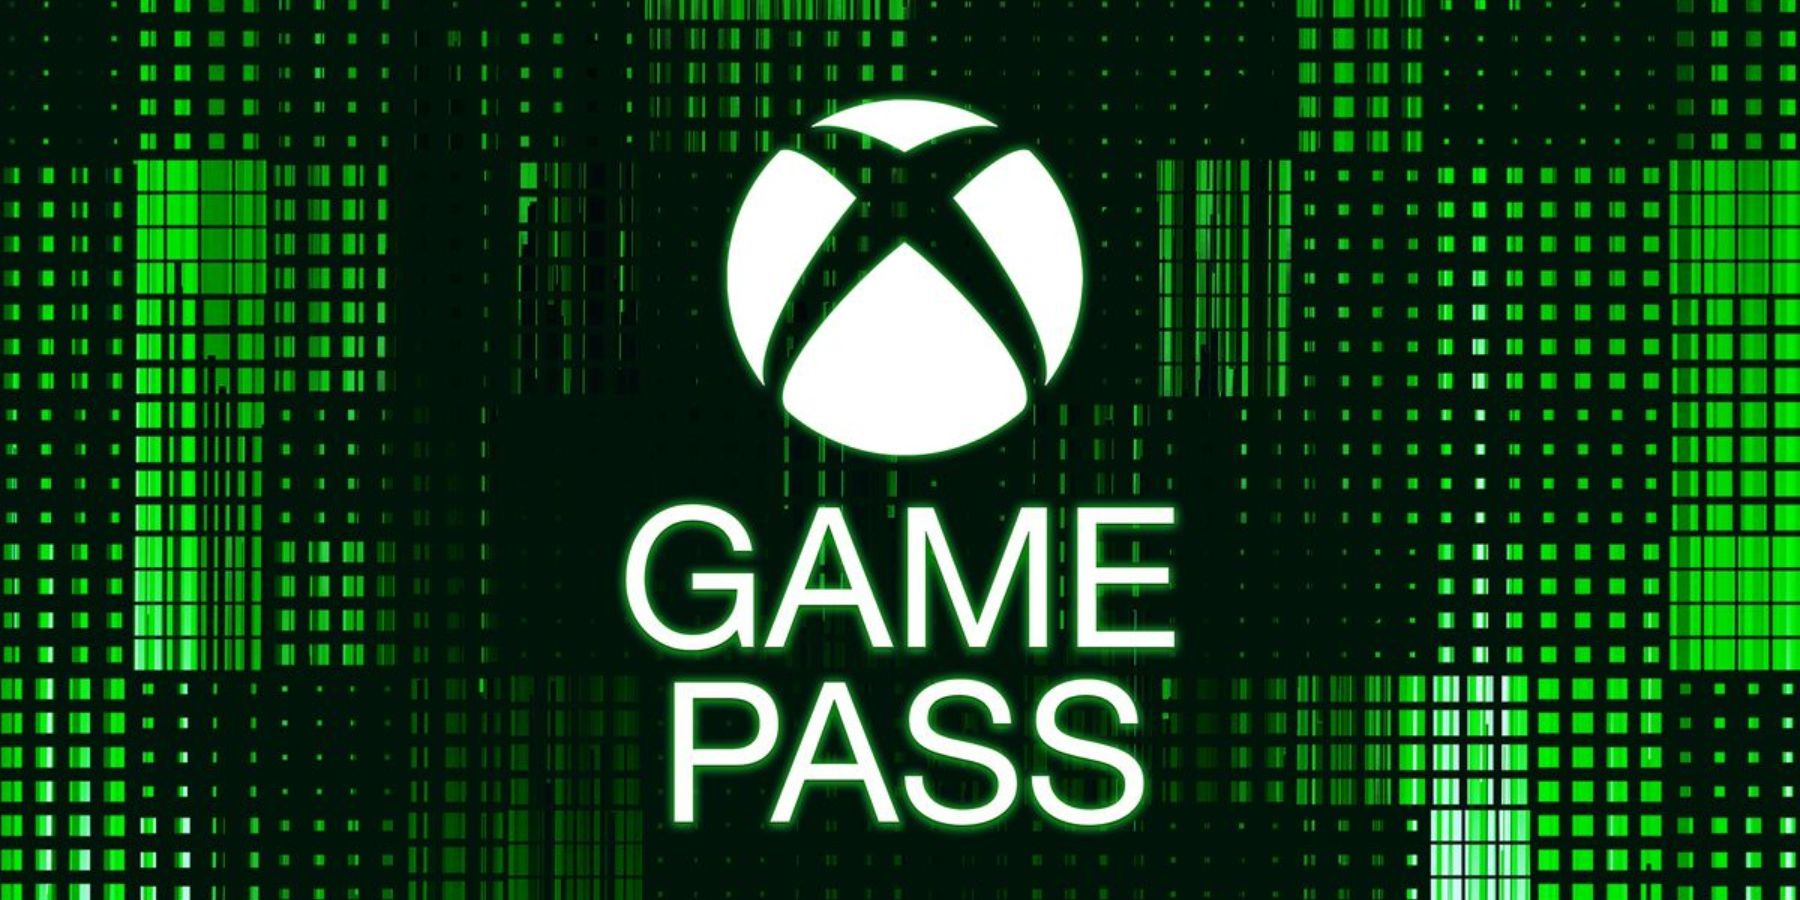 Xbox Game Pass is about to lose this incredible game with 93% on